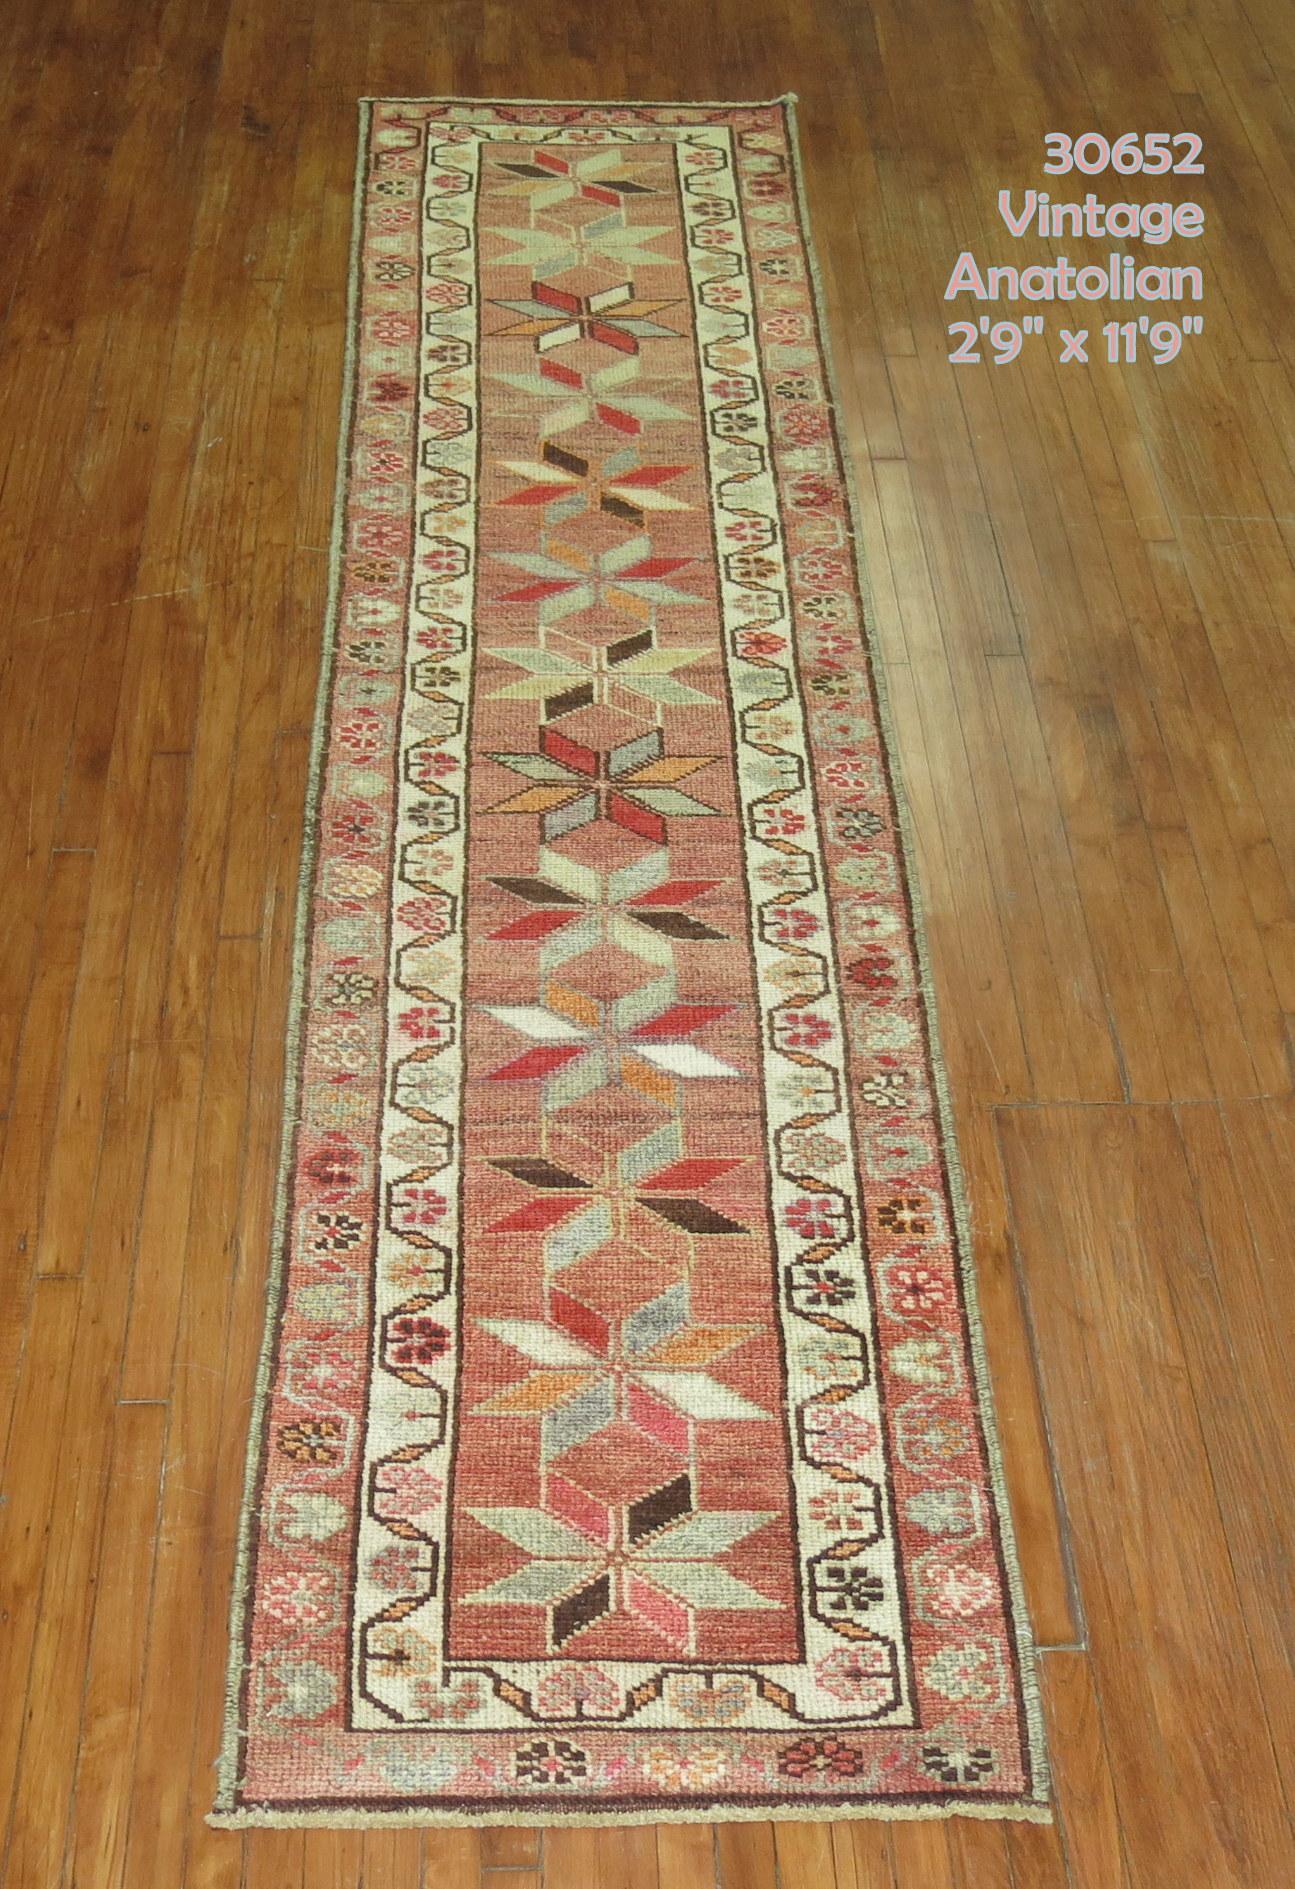 Turkish Anatolian runner with a repetitive geometric star motif on a neutral color ground from the middle of the 20th century. 

Measures: 2'9” x 11'9”.